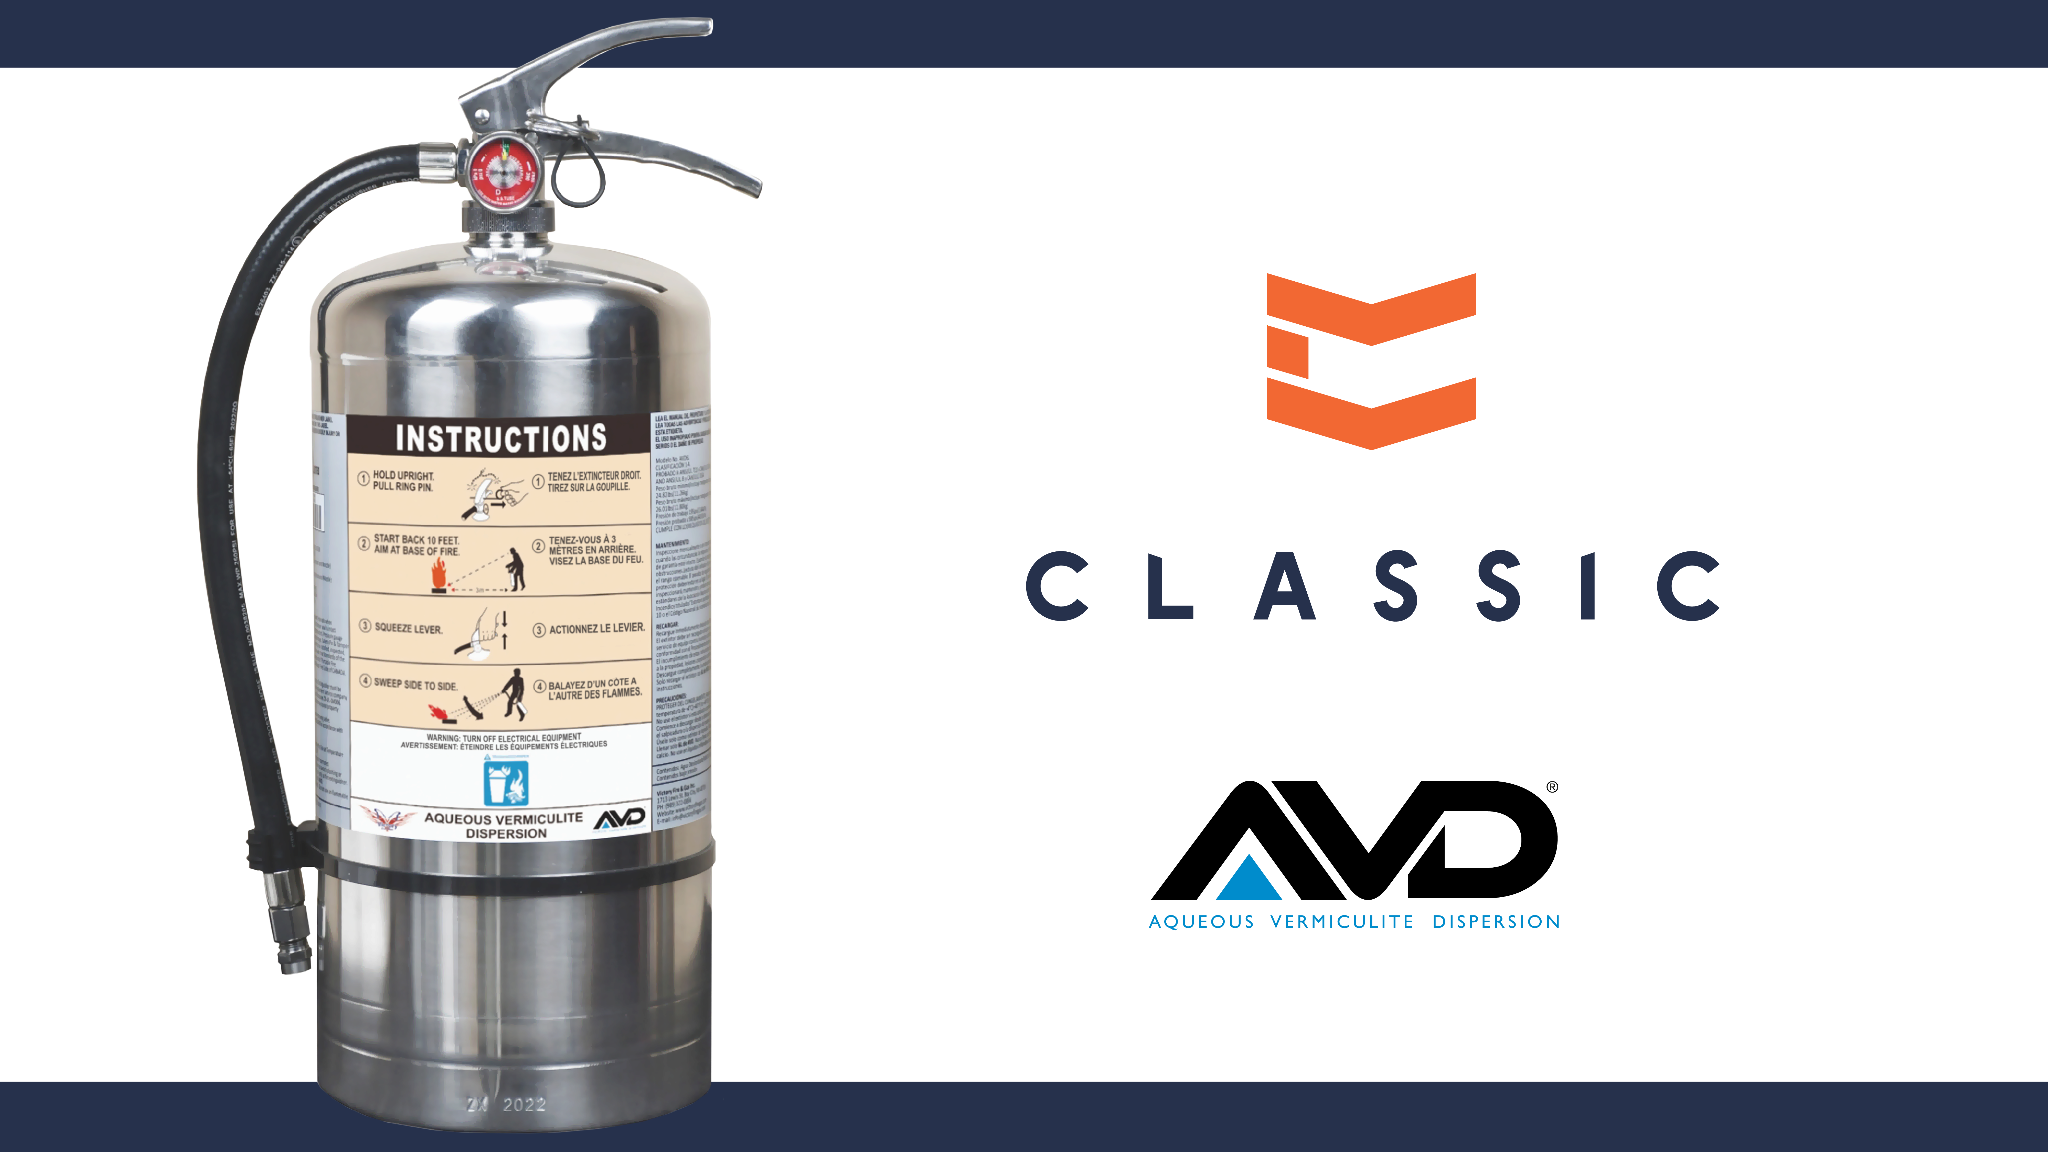 CLASSIC FIRE + LIFE SAFETY PARTNERS WITH VICTORY FIRE & GAS TO SUPPLY AVD FIRE EXTINGUISHERS TO BUSINESSES IN CANADA